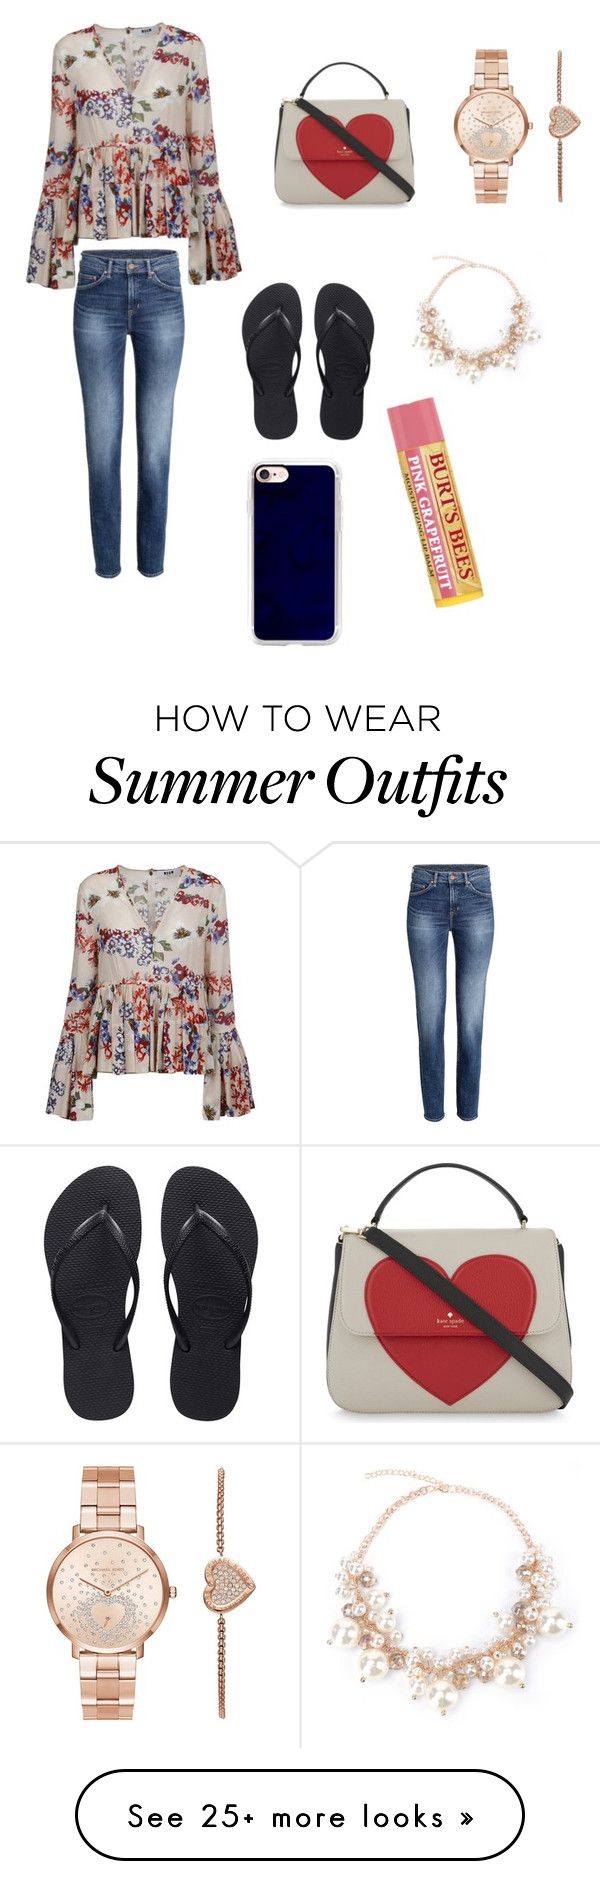 "Cute Summer Outfit ❤️" by lsantana13 on Polyvore featuring MSGM, ...